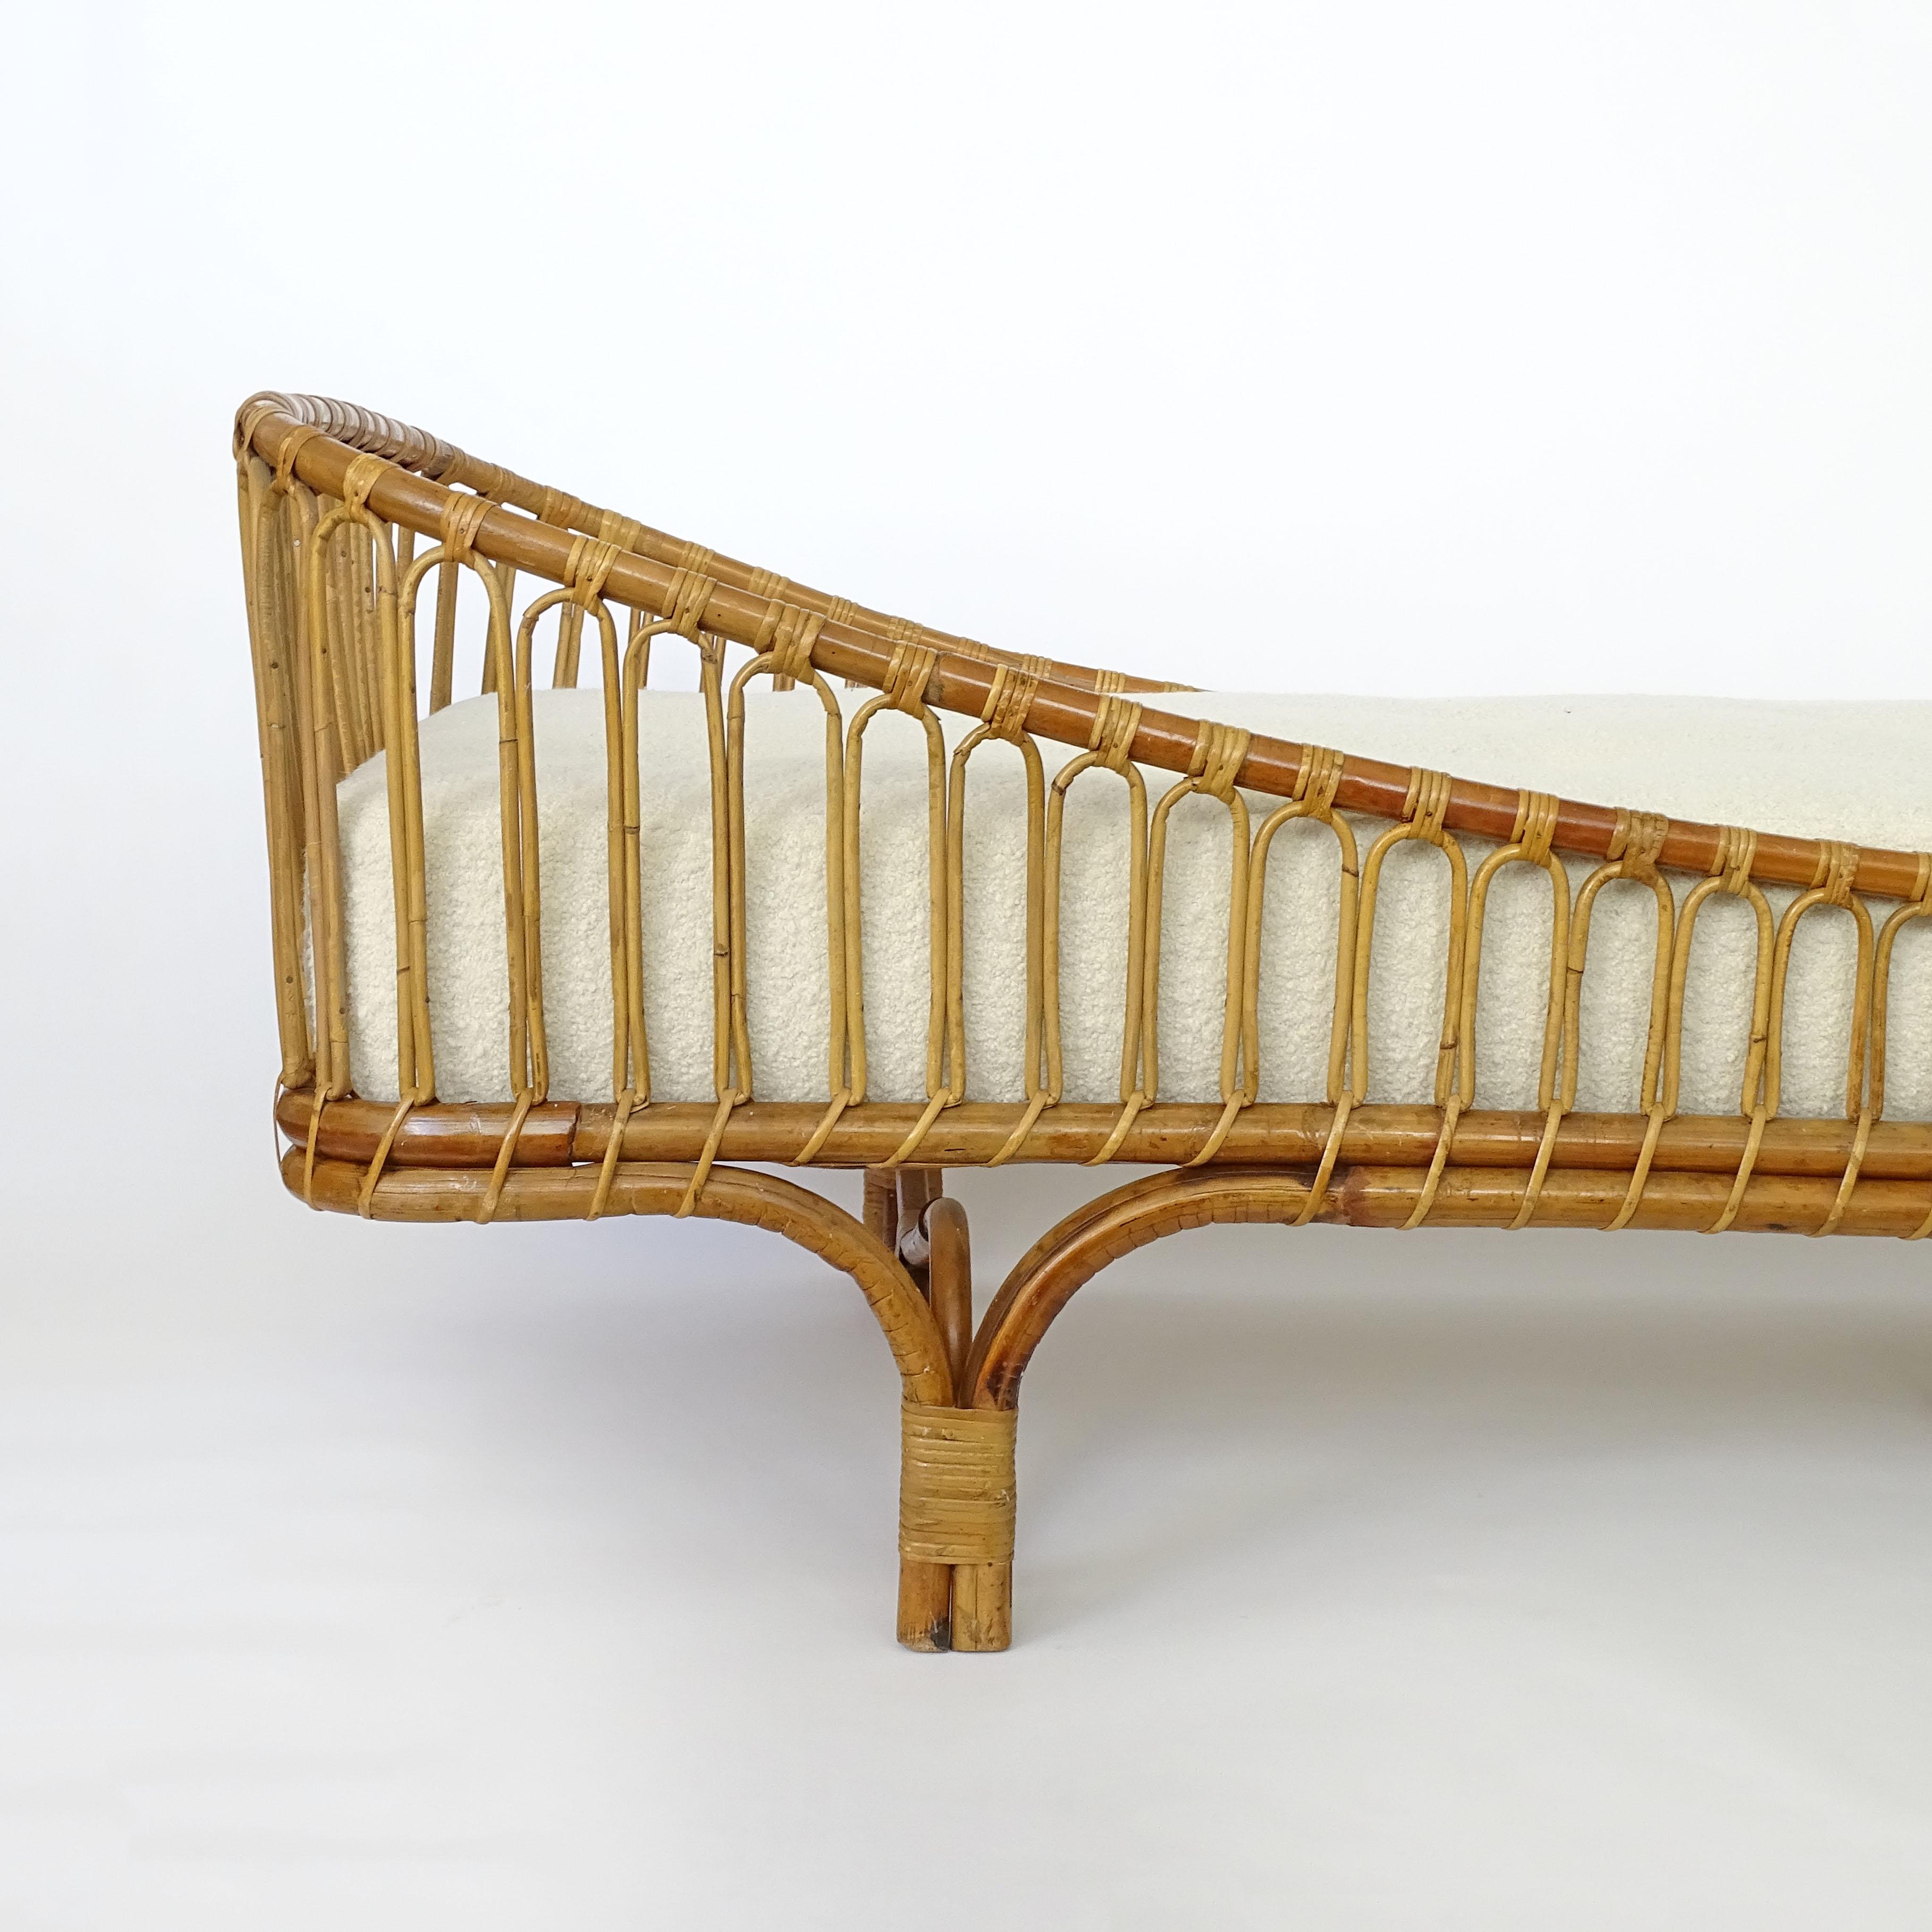 A sublime Architect Mario Cristiani rare daybed in bamboo and wicker for Bonacina, Italy 1964 

We have added a central foot that can be taken off to hold better the structure. see image